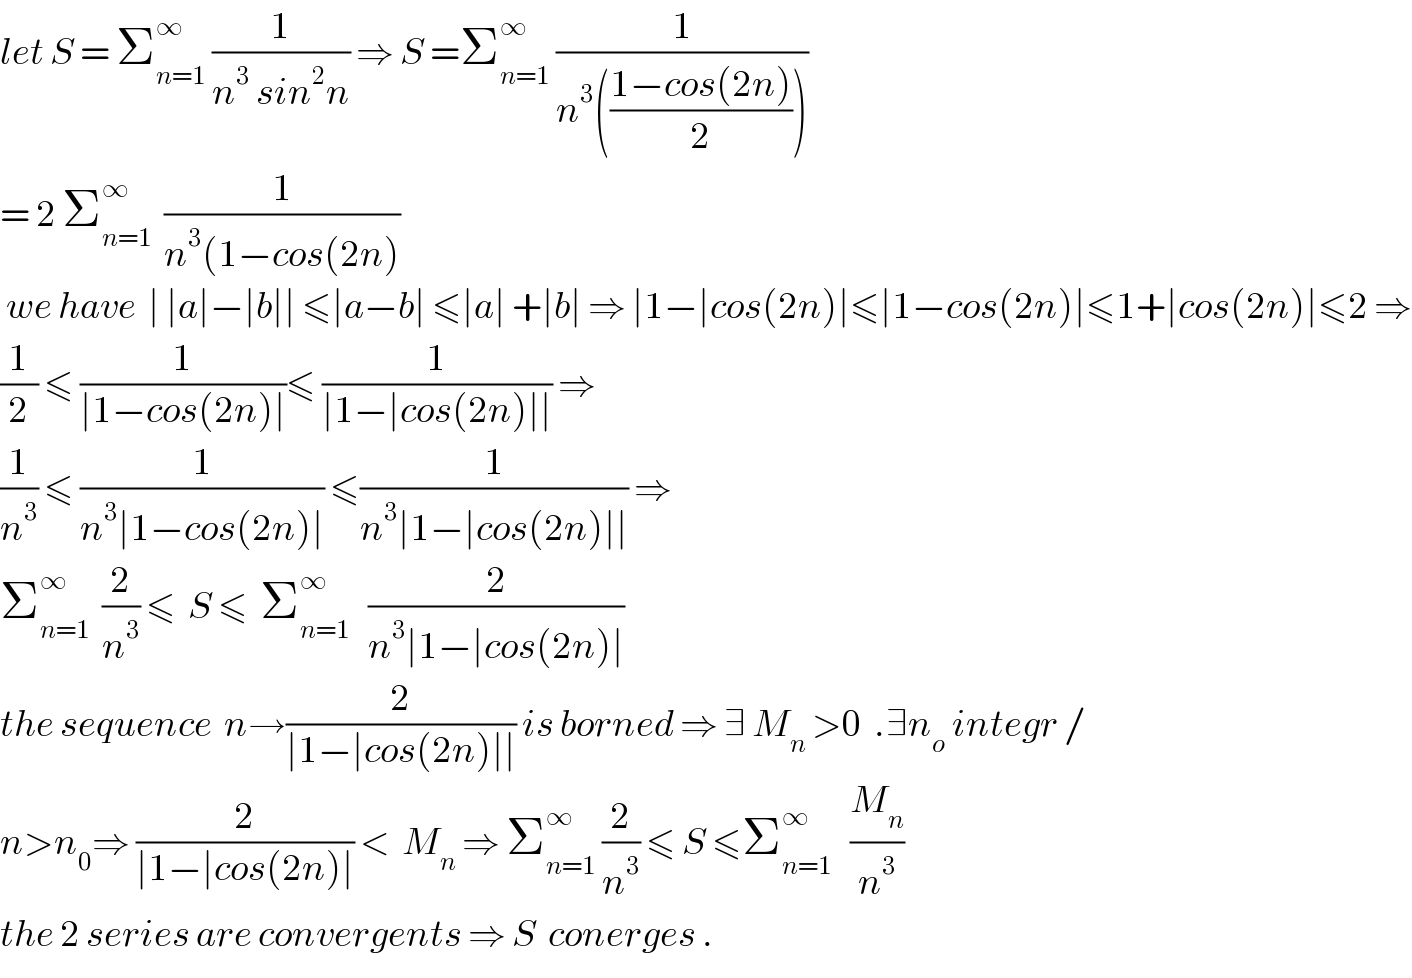 let S = Σ_(n=1) ^∞  (1/(n^3  sin^2 n)) ⇒ S =Σ_(n=1) ^∞  (1/(n^3 (((1−cos(2n))/2))))  = 2 Σ_(n=1) ^∞   (1/(n^3 (1−cos(2n)))   we have  ∣ ∣a∣−∣b∣∣ ≤∣a−b∣ ≤∣a∣ +∣b∣ ⇒ ∣1−∣cos(2n)∣≤∣1−cos(2n)∣≤1+∣cos(2n)∣≤2 ⇒  (1/2) ≤ (1/(∣1−cos(2n)∣))≤ (1/(∣1−∣cos(2n)∣∣)) ⇒  (1/n^3 ) ≤ (1/(n^3 ∣1−cos(2n)∣)) ≤(1/(n^3 ∣1−∣cos(2n)∣∣)) ⇒   Σ_(n=1) ^∞   (2/n^3 ) ≤  S ≤  Σ_(n=1) ^∞    (2/(n^3 ∣1−∣cos(2n)∣))  the sequence  n→(2/(∣1−∣cos(2n)∣∣)) is borned ⇒ ∃ M_n  >0  .∃n_o  integr /  n>n_0 ⇒ (2/(∣1−∣cos(2n)∣)) <  M_n  ⇒ Σ_(n=1) ^∞  (2/n^3 ) ≤ S ≤Σ_(n=1) ^∞    (M_n /n^3 )  the 2 series are convergents ⇒ S  conerges .  